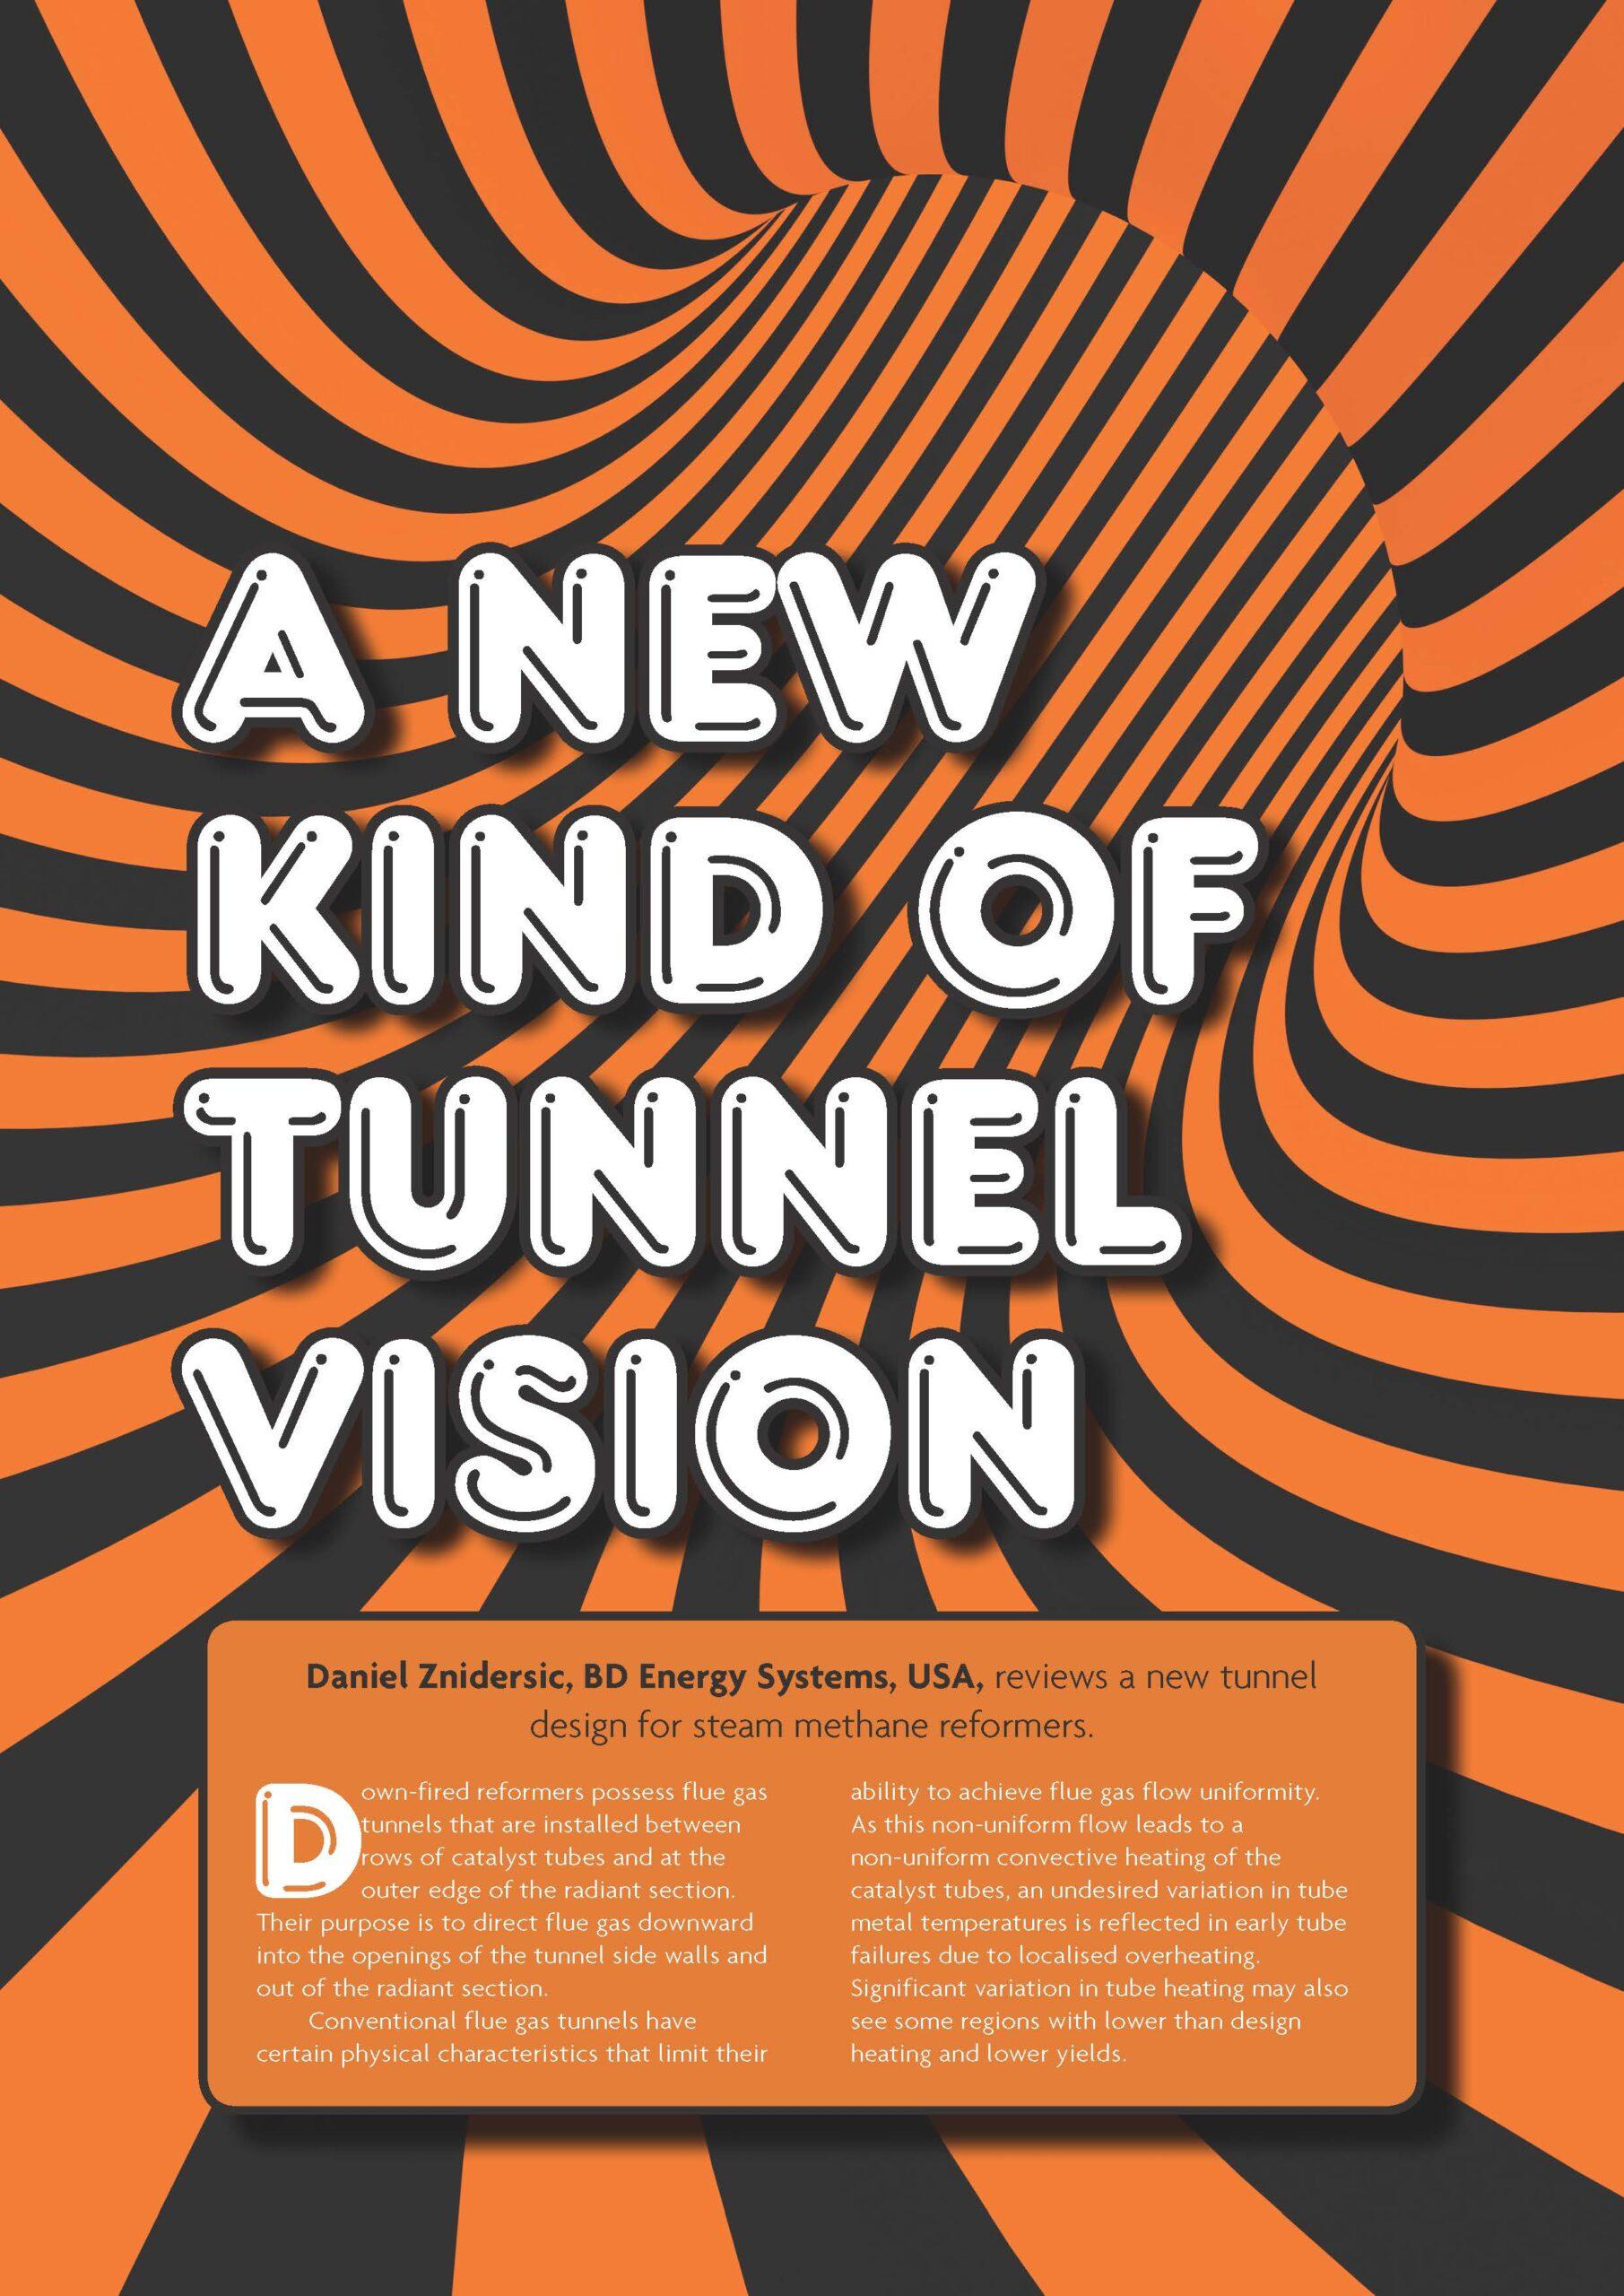 First page of "A New Kind of Tunnel Vision" article.